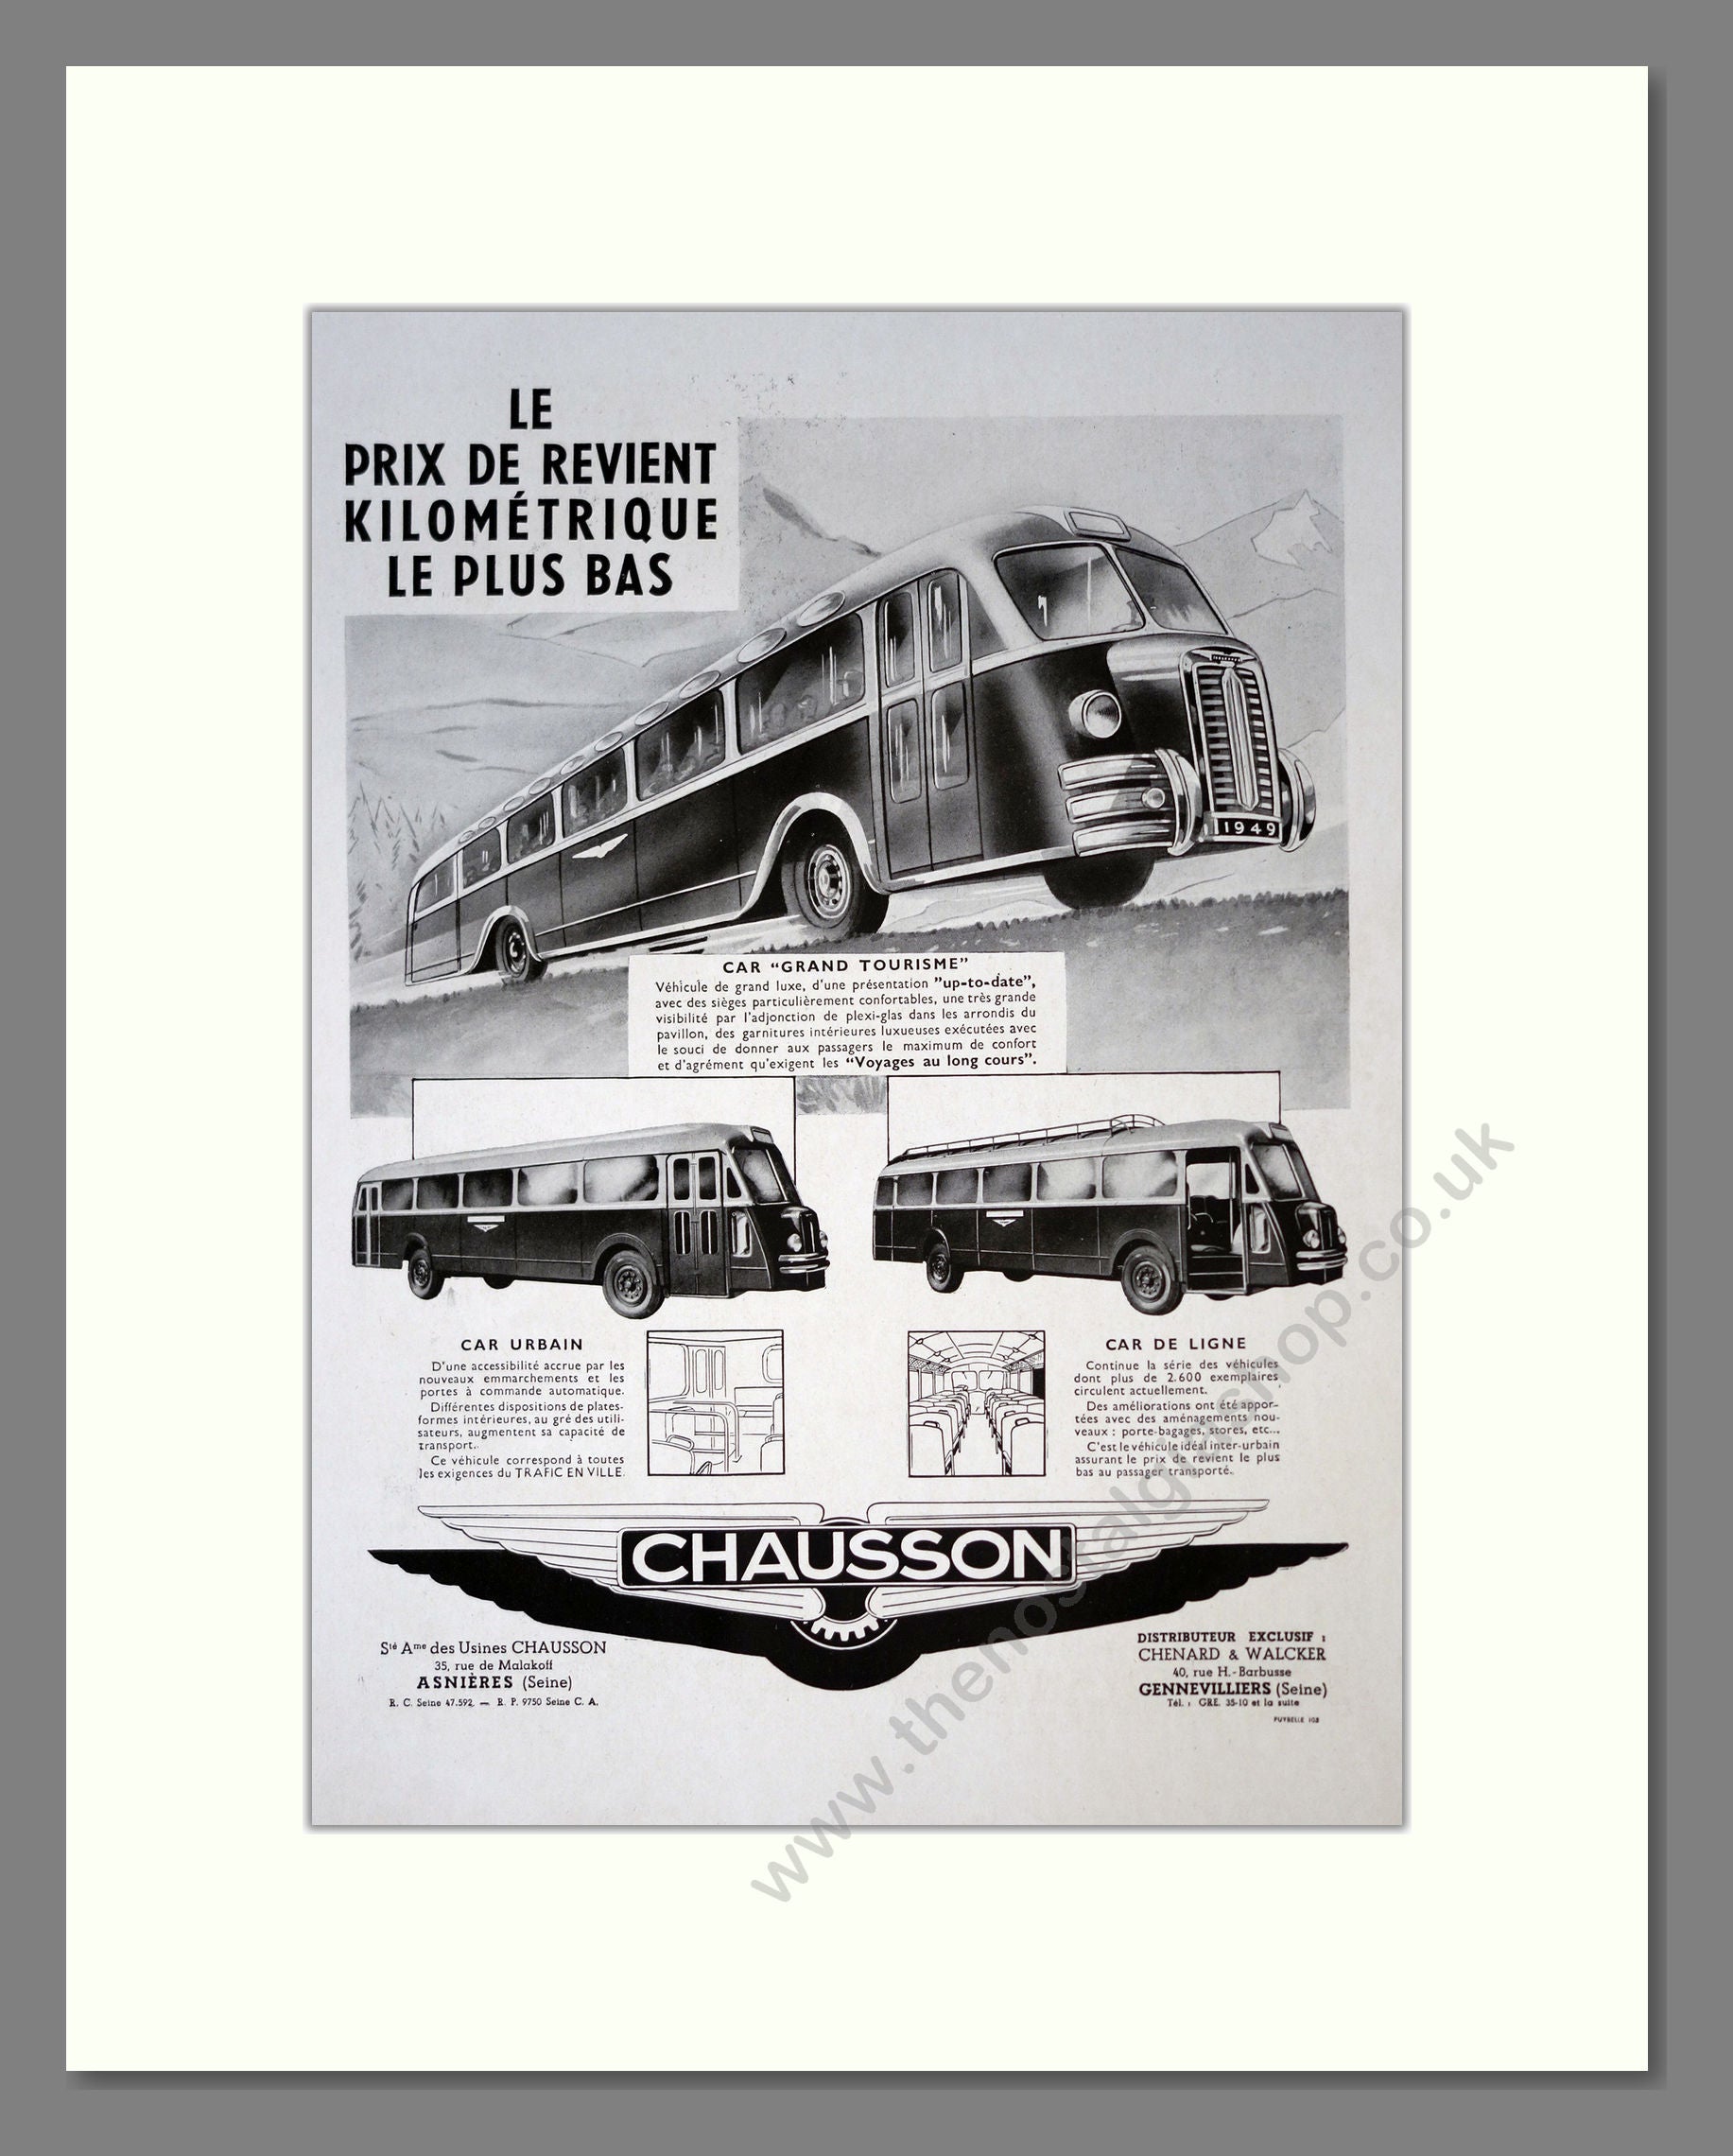 Chausson Buses. Vintage Advert (ref AD301866)